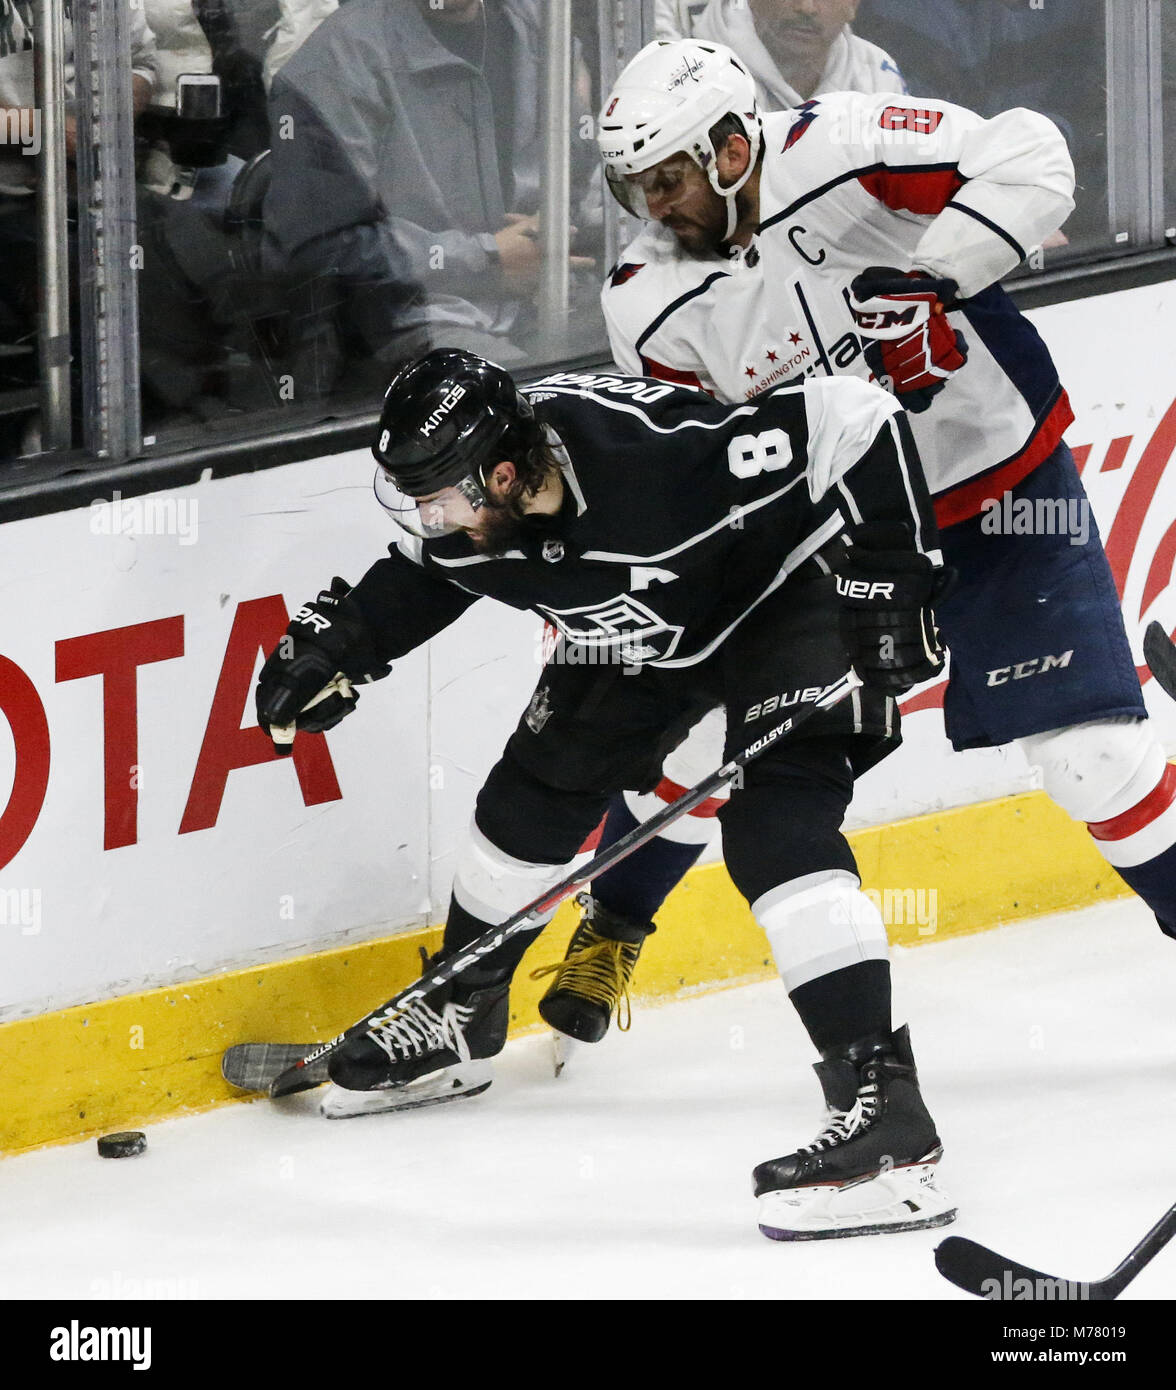 Los Angeles, California, USA. 8th Mar, 2018. Los Angeles Kings' defenseman Drew Doughty (8) vies with Washington Capitals' forward Alex Ovechkin (8) during a 2017-2018 NHL hockey game in Los Angeles, on March 8, 2018. The Kings won 3-1. Credit: Ringo Chiu/ZUMA Wire/Alamy Live News Stock Photo